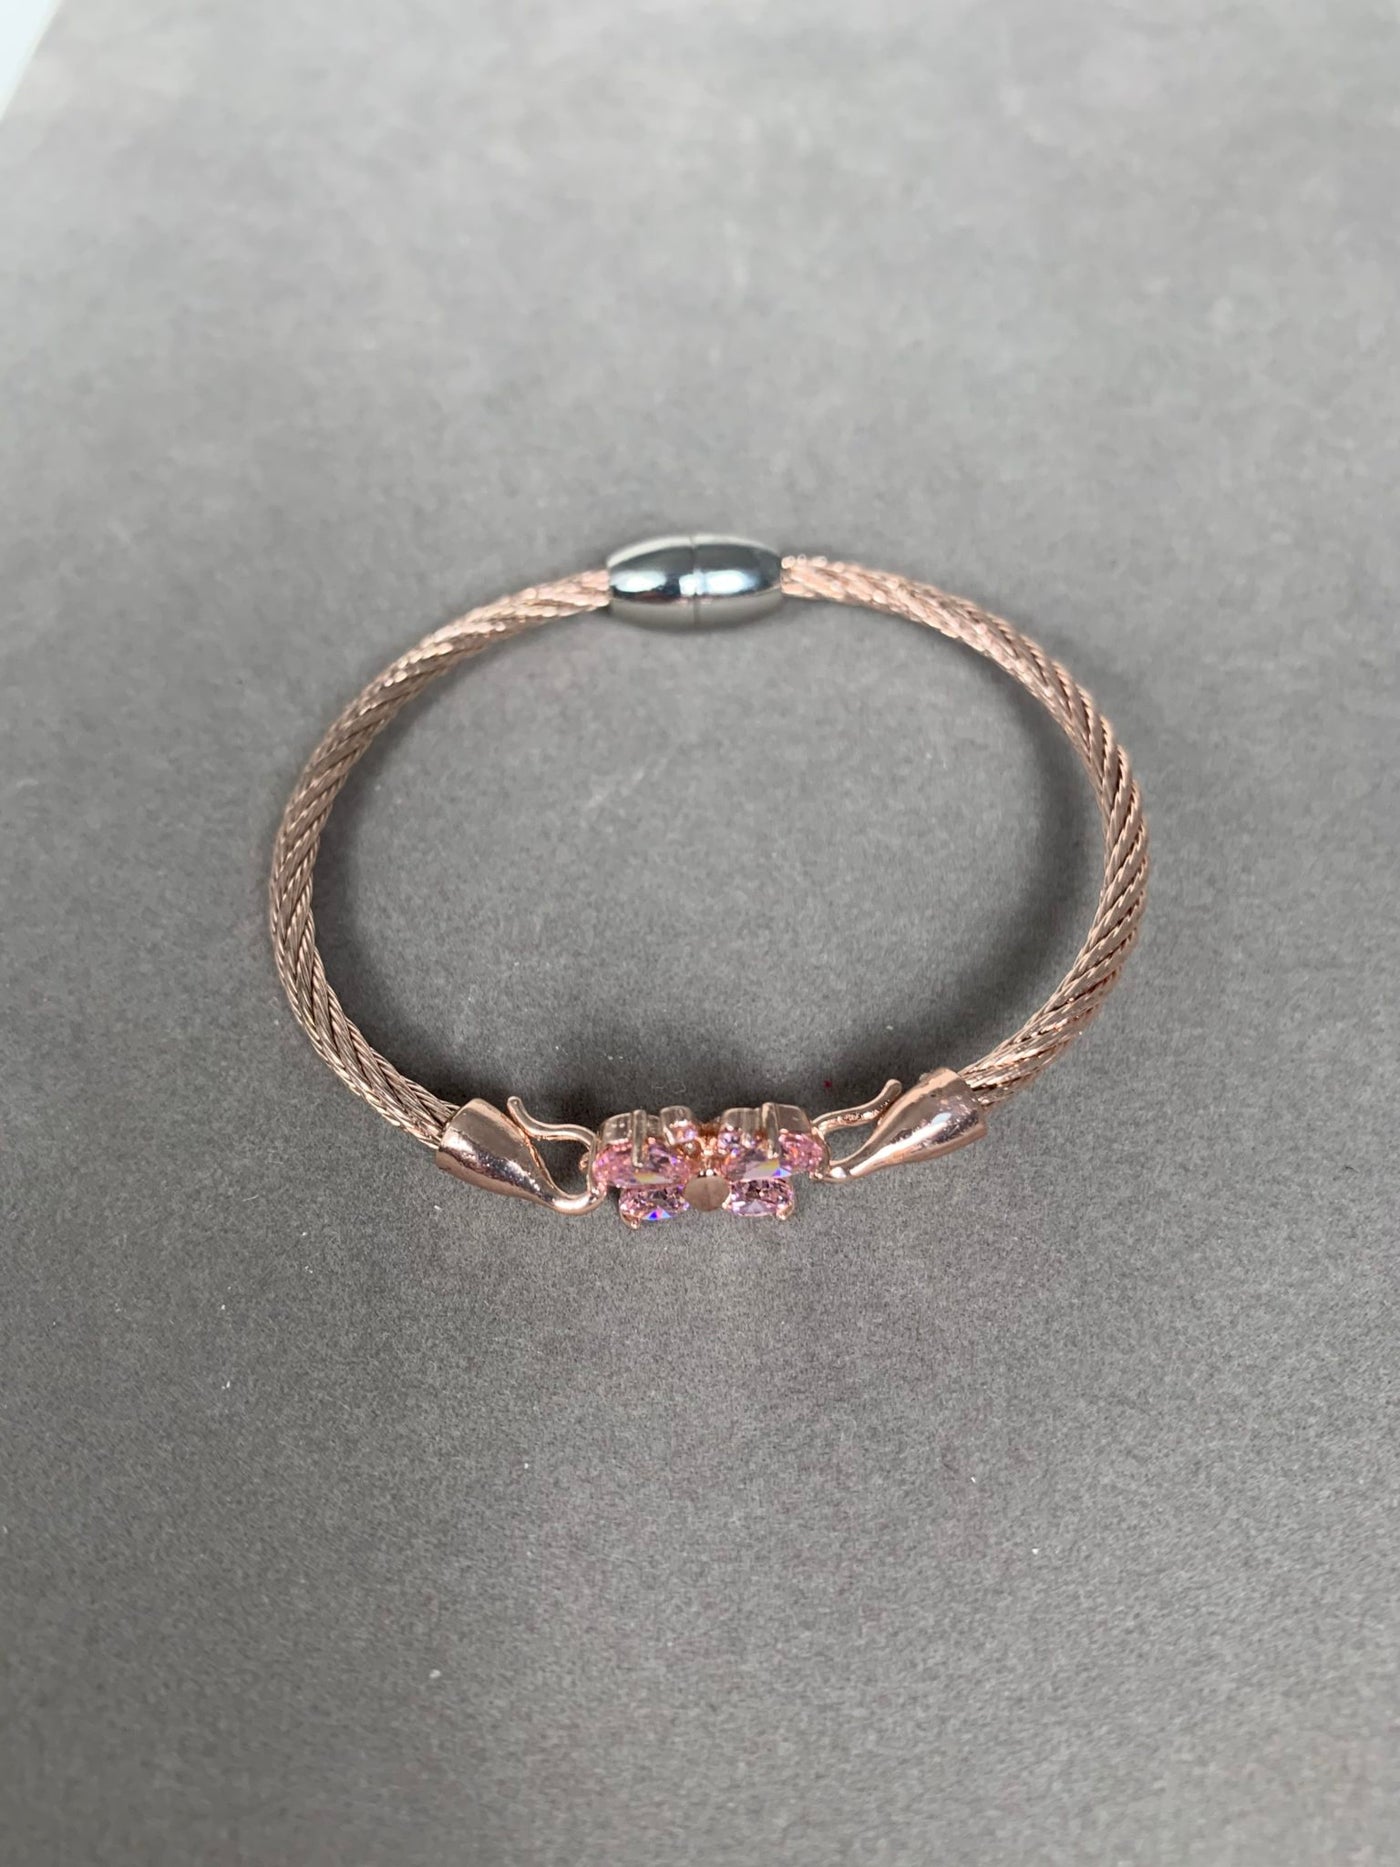 Rose Gold Tone Wire Bangle Bracelet featuring Pink Crystal Butterfly